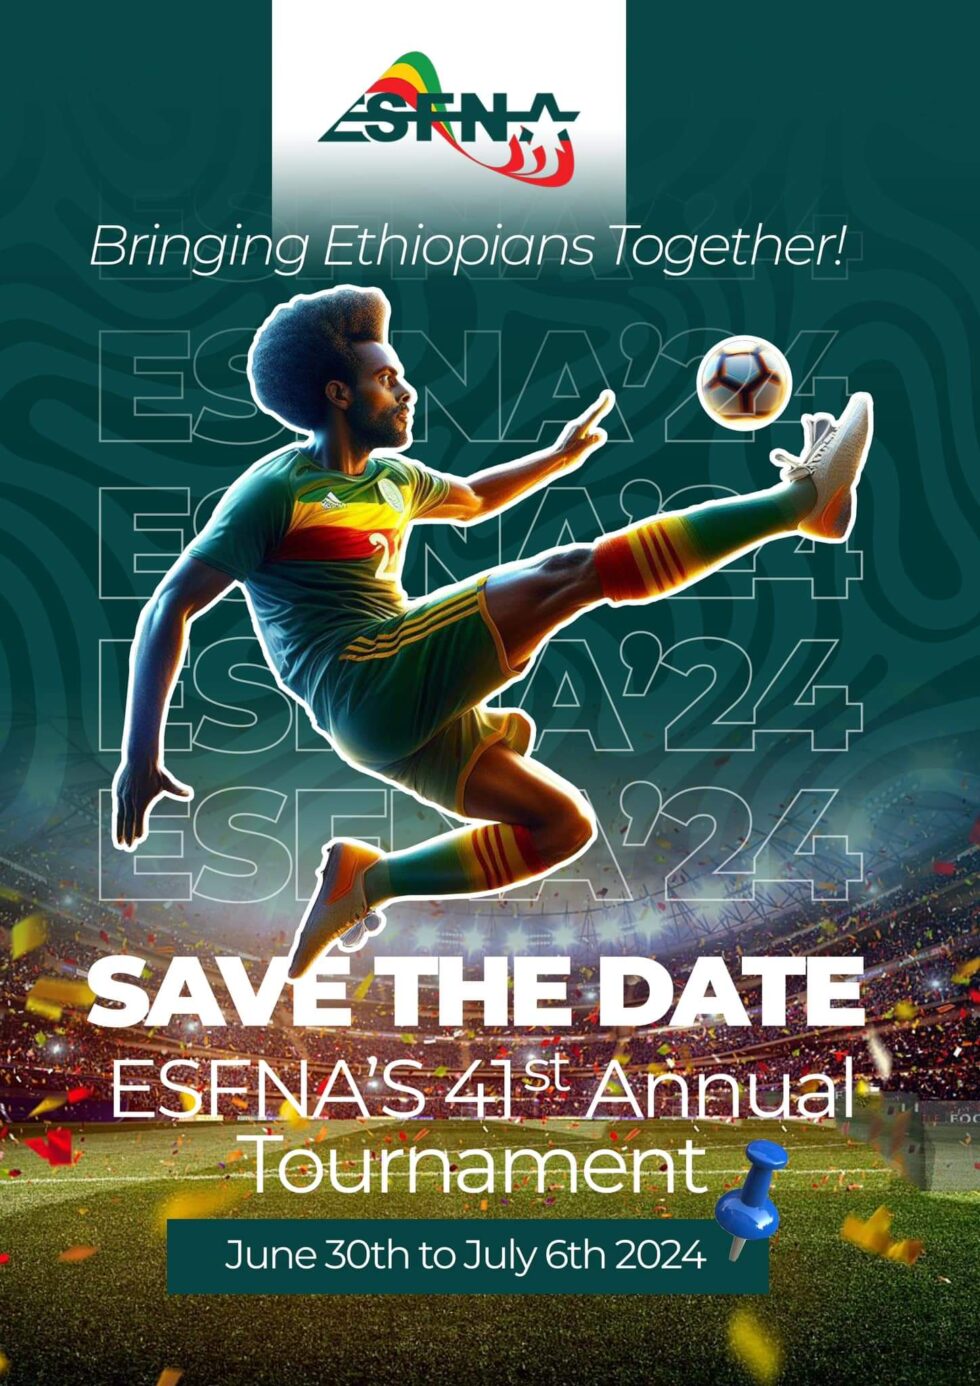 SAVE THE DATE!!! Ethiopian Sports Federation in North America